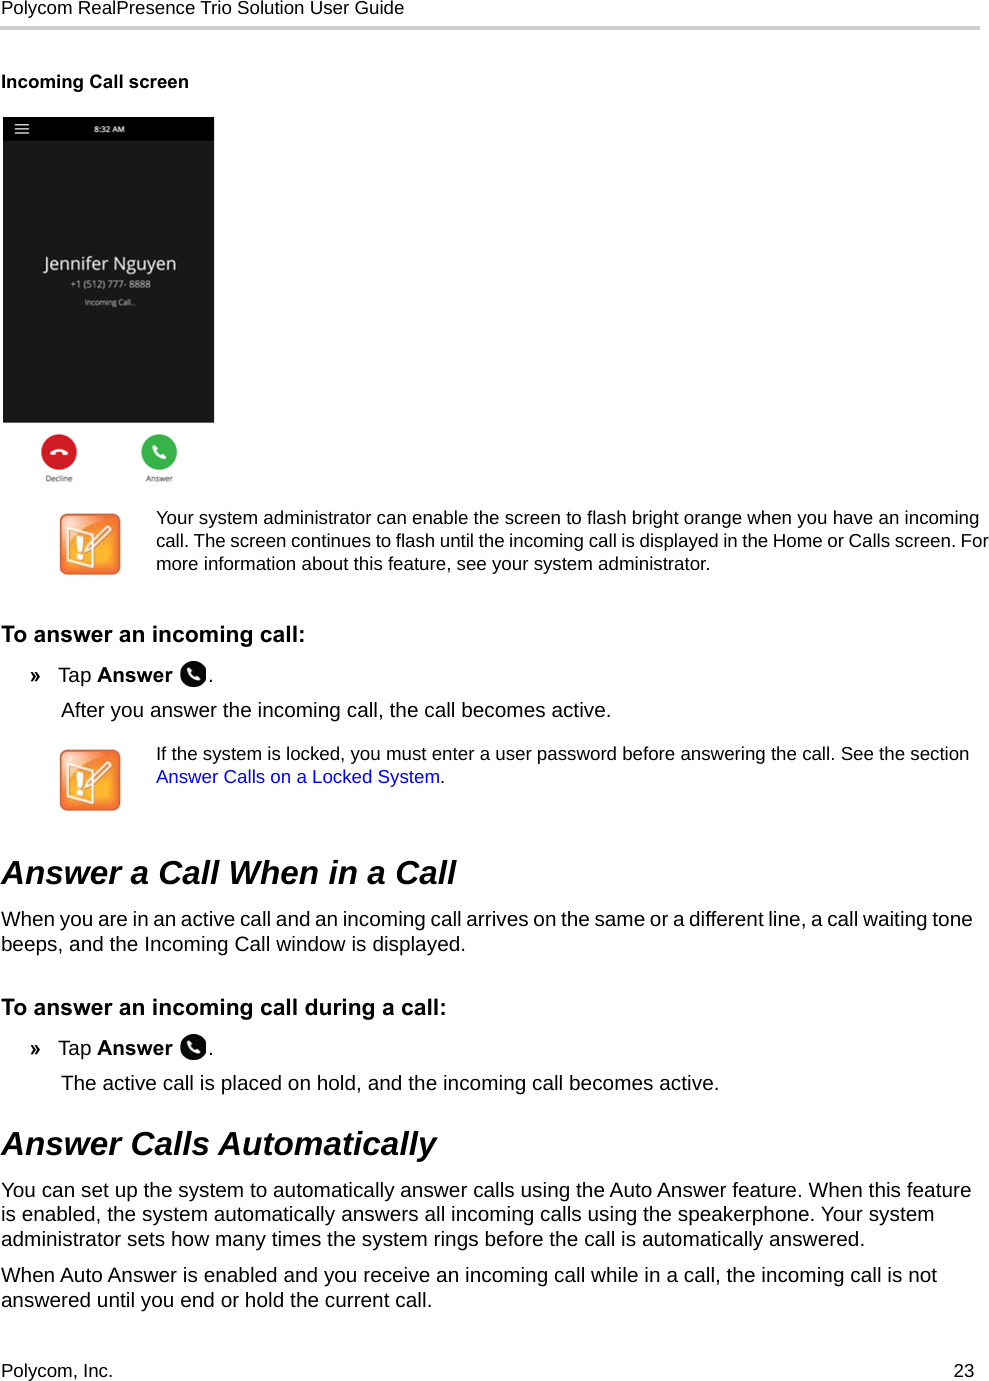 Polycom RealPresence Trio Solution User Guide Polycom, Inc.  23   Incoming Call screenTo answer an incoming call:»Tap Answer .After you answer the incoming call, the call becomes active.Answer a Call When in a CallWhen you are in an active call and an incoming call arrives on the same or a different line, a call waiting tone beeps, and the Incoming Call window is displayed. To answer an incoming call during a call: »Tap Answer . The active call is placed on hold, and the incoming call becomes active.Answer Calls AutomaticallyYou can set up the system to automatically answer calls using the Auto Answer feature. When this feature is enabled, the system automatically answers all incoming calls using the speakerphone. Your system administrator sets how many times the system rings before the call is automatically answered.When Auto Answer is enabled and you receive an incoming call while in a call, the incoming call is not answered until you end or hold the current call.Your system administrator can enable the screen to flash bright orange when you have an incoming call. The screen continues to flash until the incoming call is displayed in the Home or Calls screen. For more information about this feature, see your system administrator.If the system is locked, you must enter a user password before answering the call. See the section Answer Calls on a Locked System.